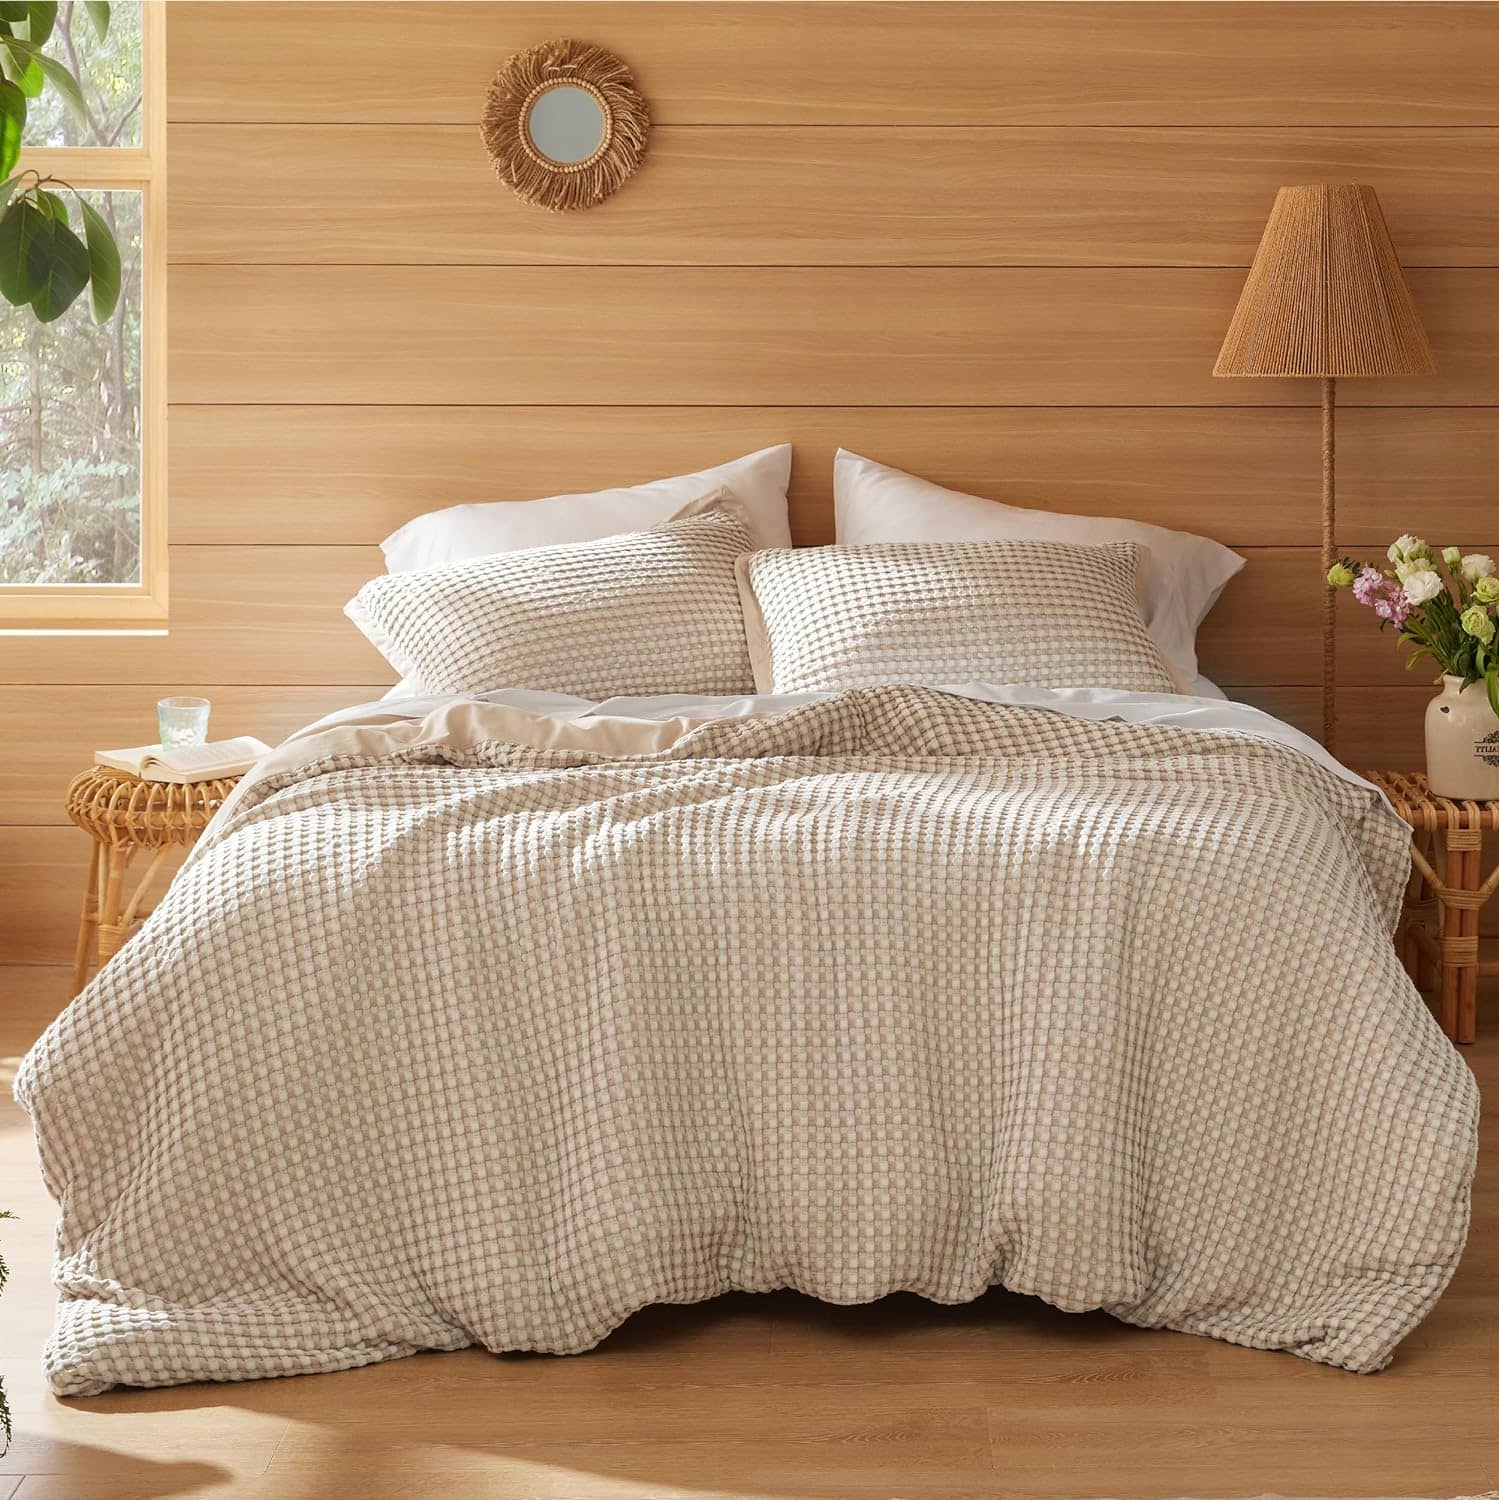 Bedsure Rayon Derived from Bamboo and Cotton Duvet Cover Set